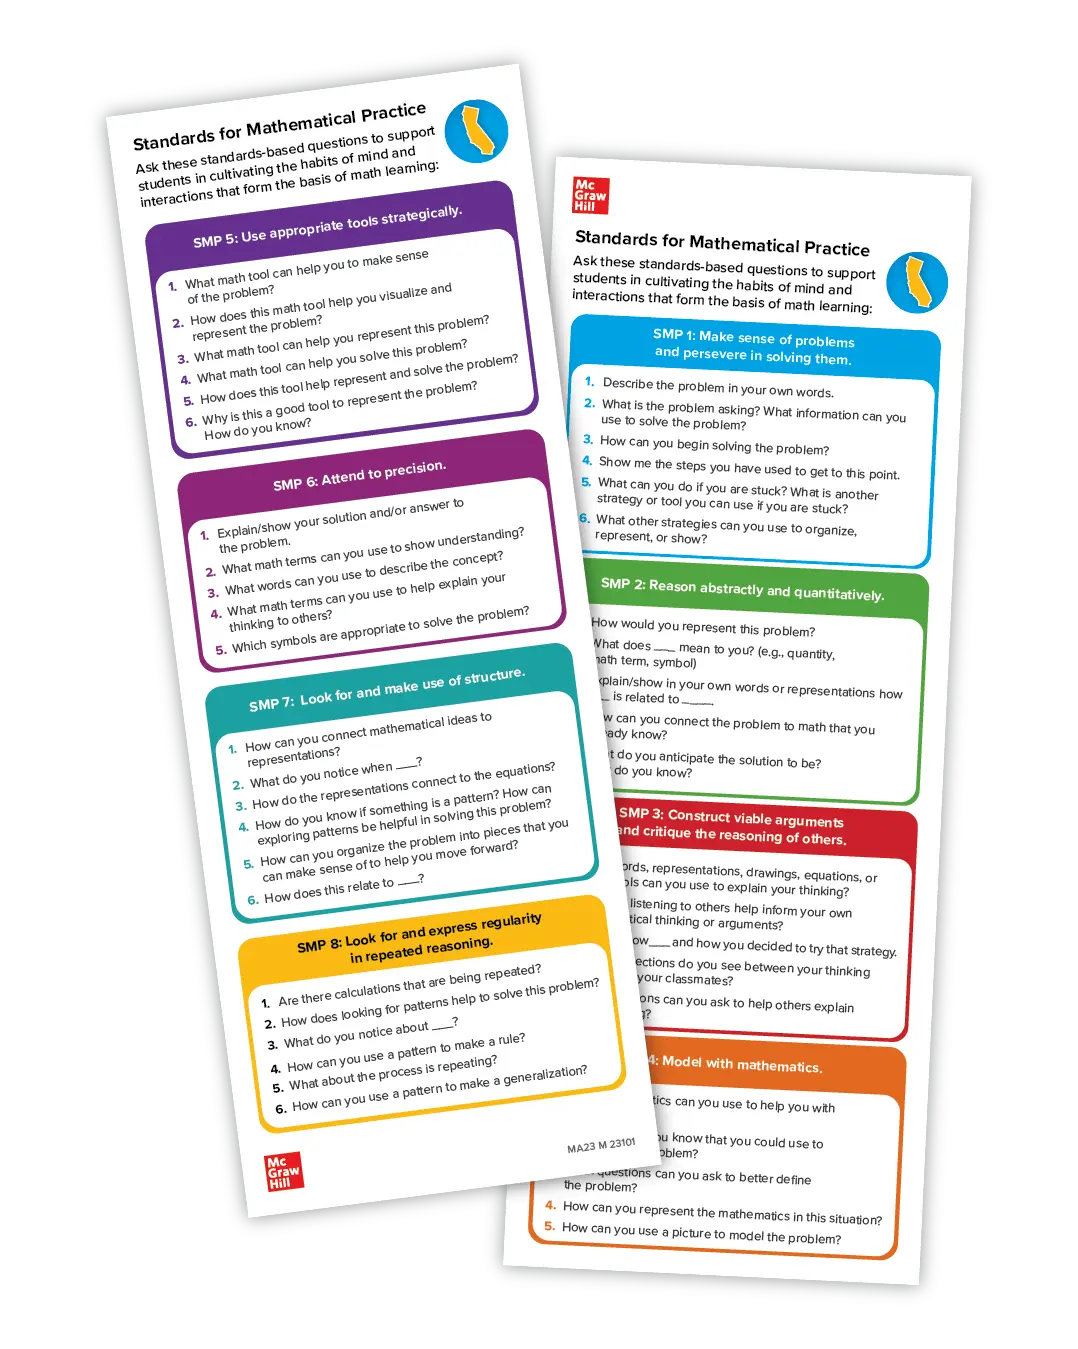 SMP Bookmark: Two bookmarks list discussion questions aligned  to the Standards for Mathematical Practice.